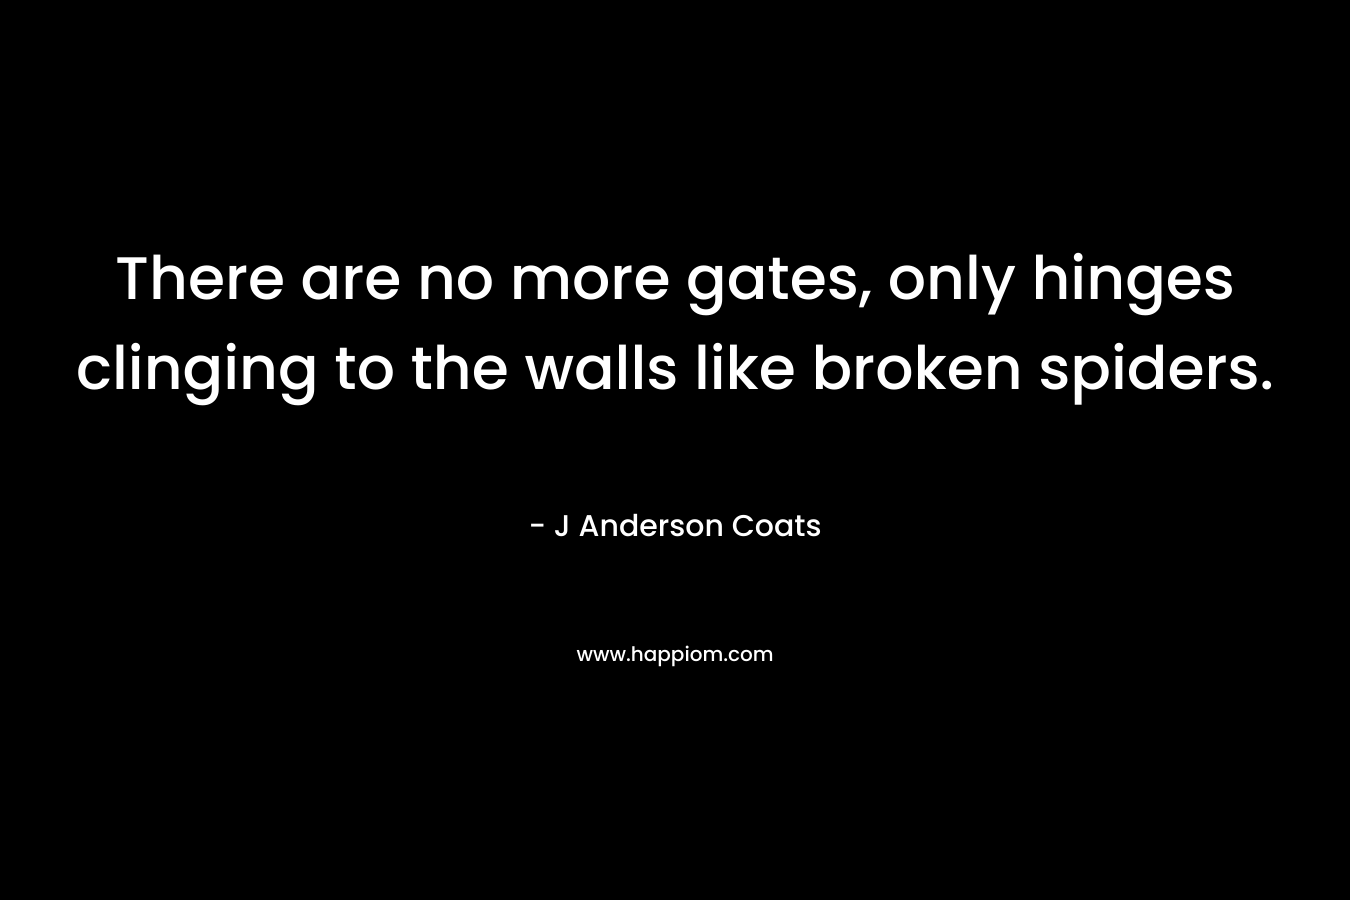 There are no more gates, only hinges clinging to the walls like broken spiders. – J Anderson Coats